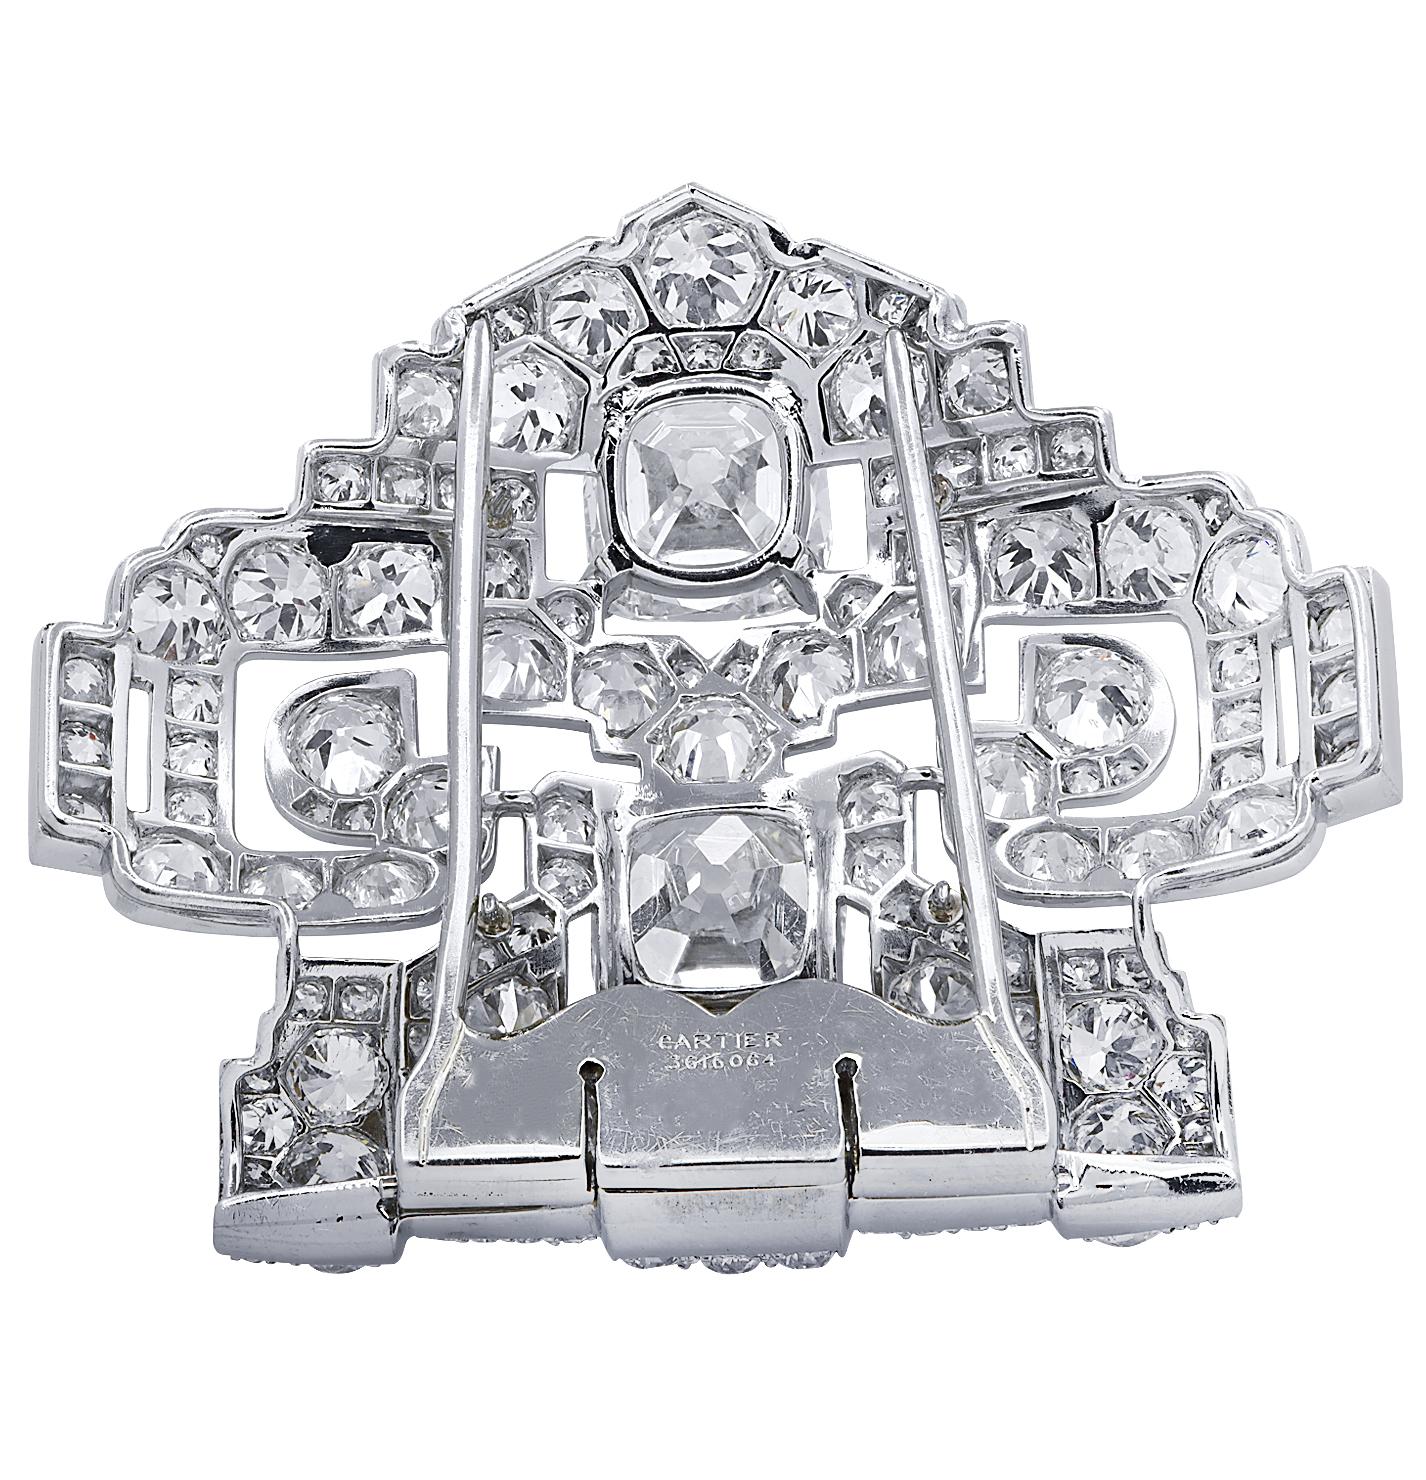 Cartier New York GIA Certified 11.24 Carat Old Mine Cushion Diamond Brooch For Sale 3